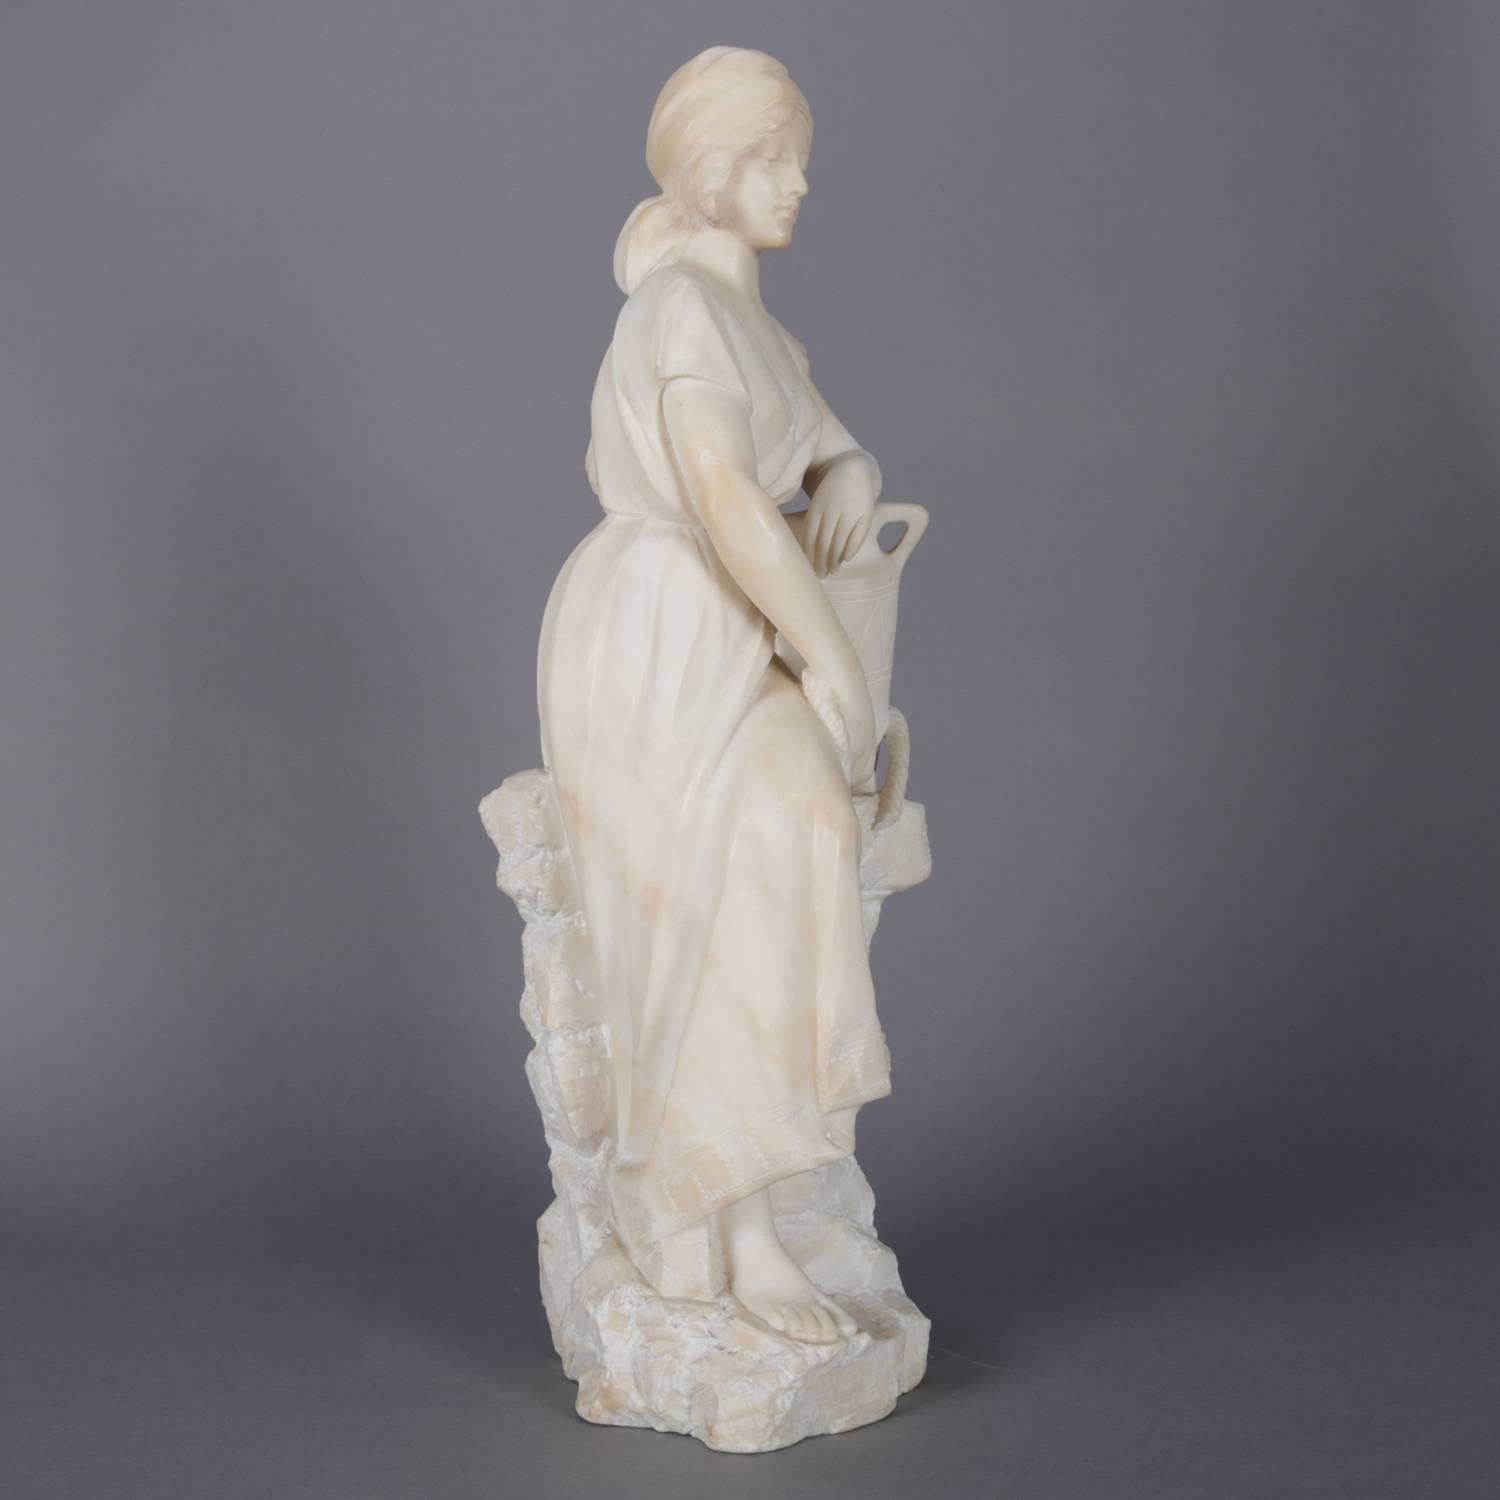 Antique Italian carved alabaster full length portrait sculpture depicts a woman with her water vessel at the well, well executed and fine detail, signed illegible, 19th century

Measures - 25